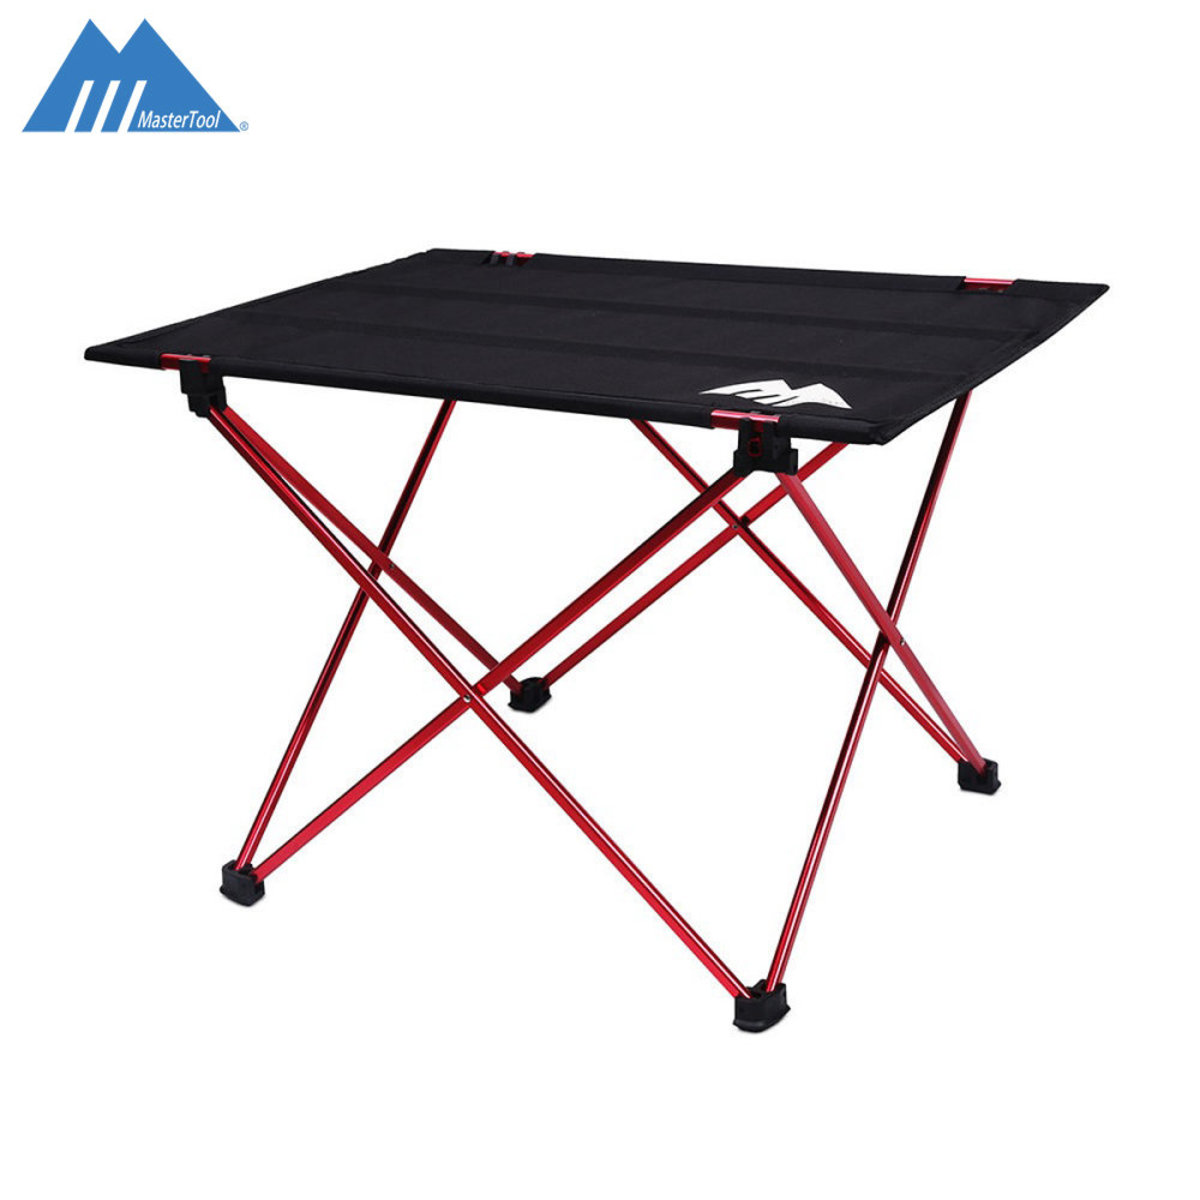 MasterTool - Camping Foldable Table Hard Top (Red)